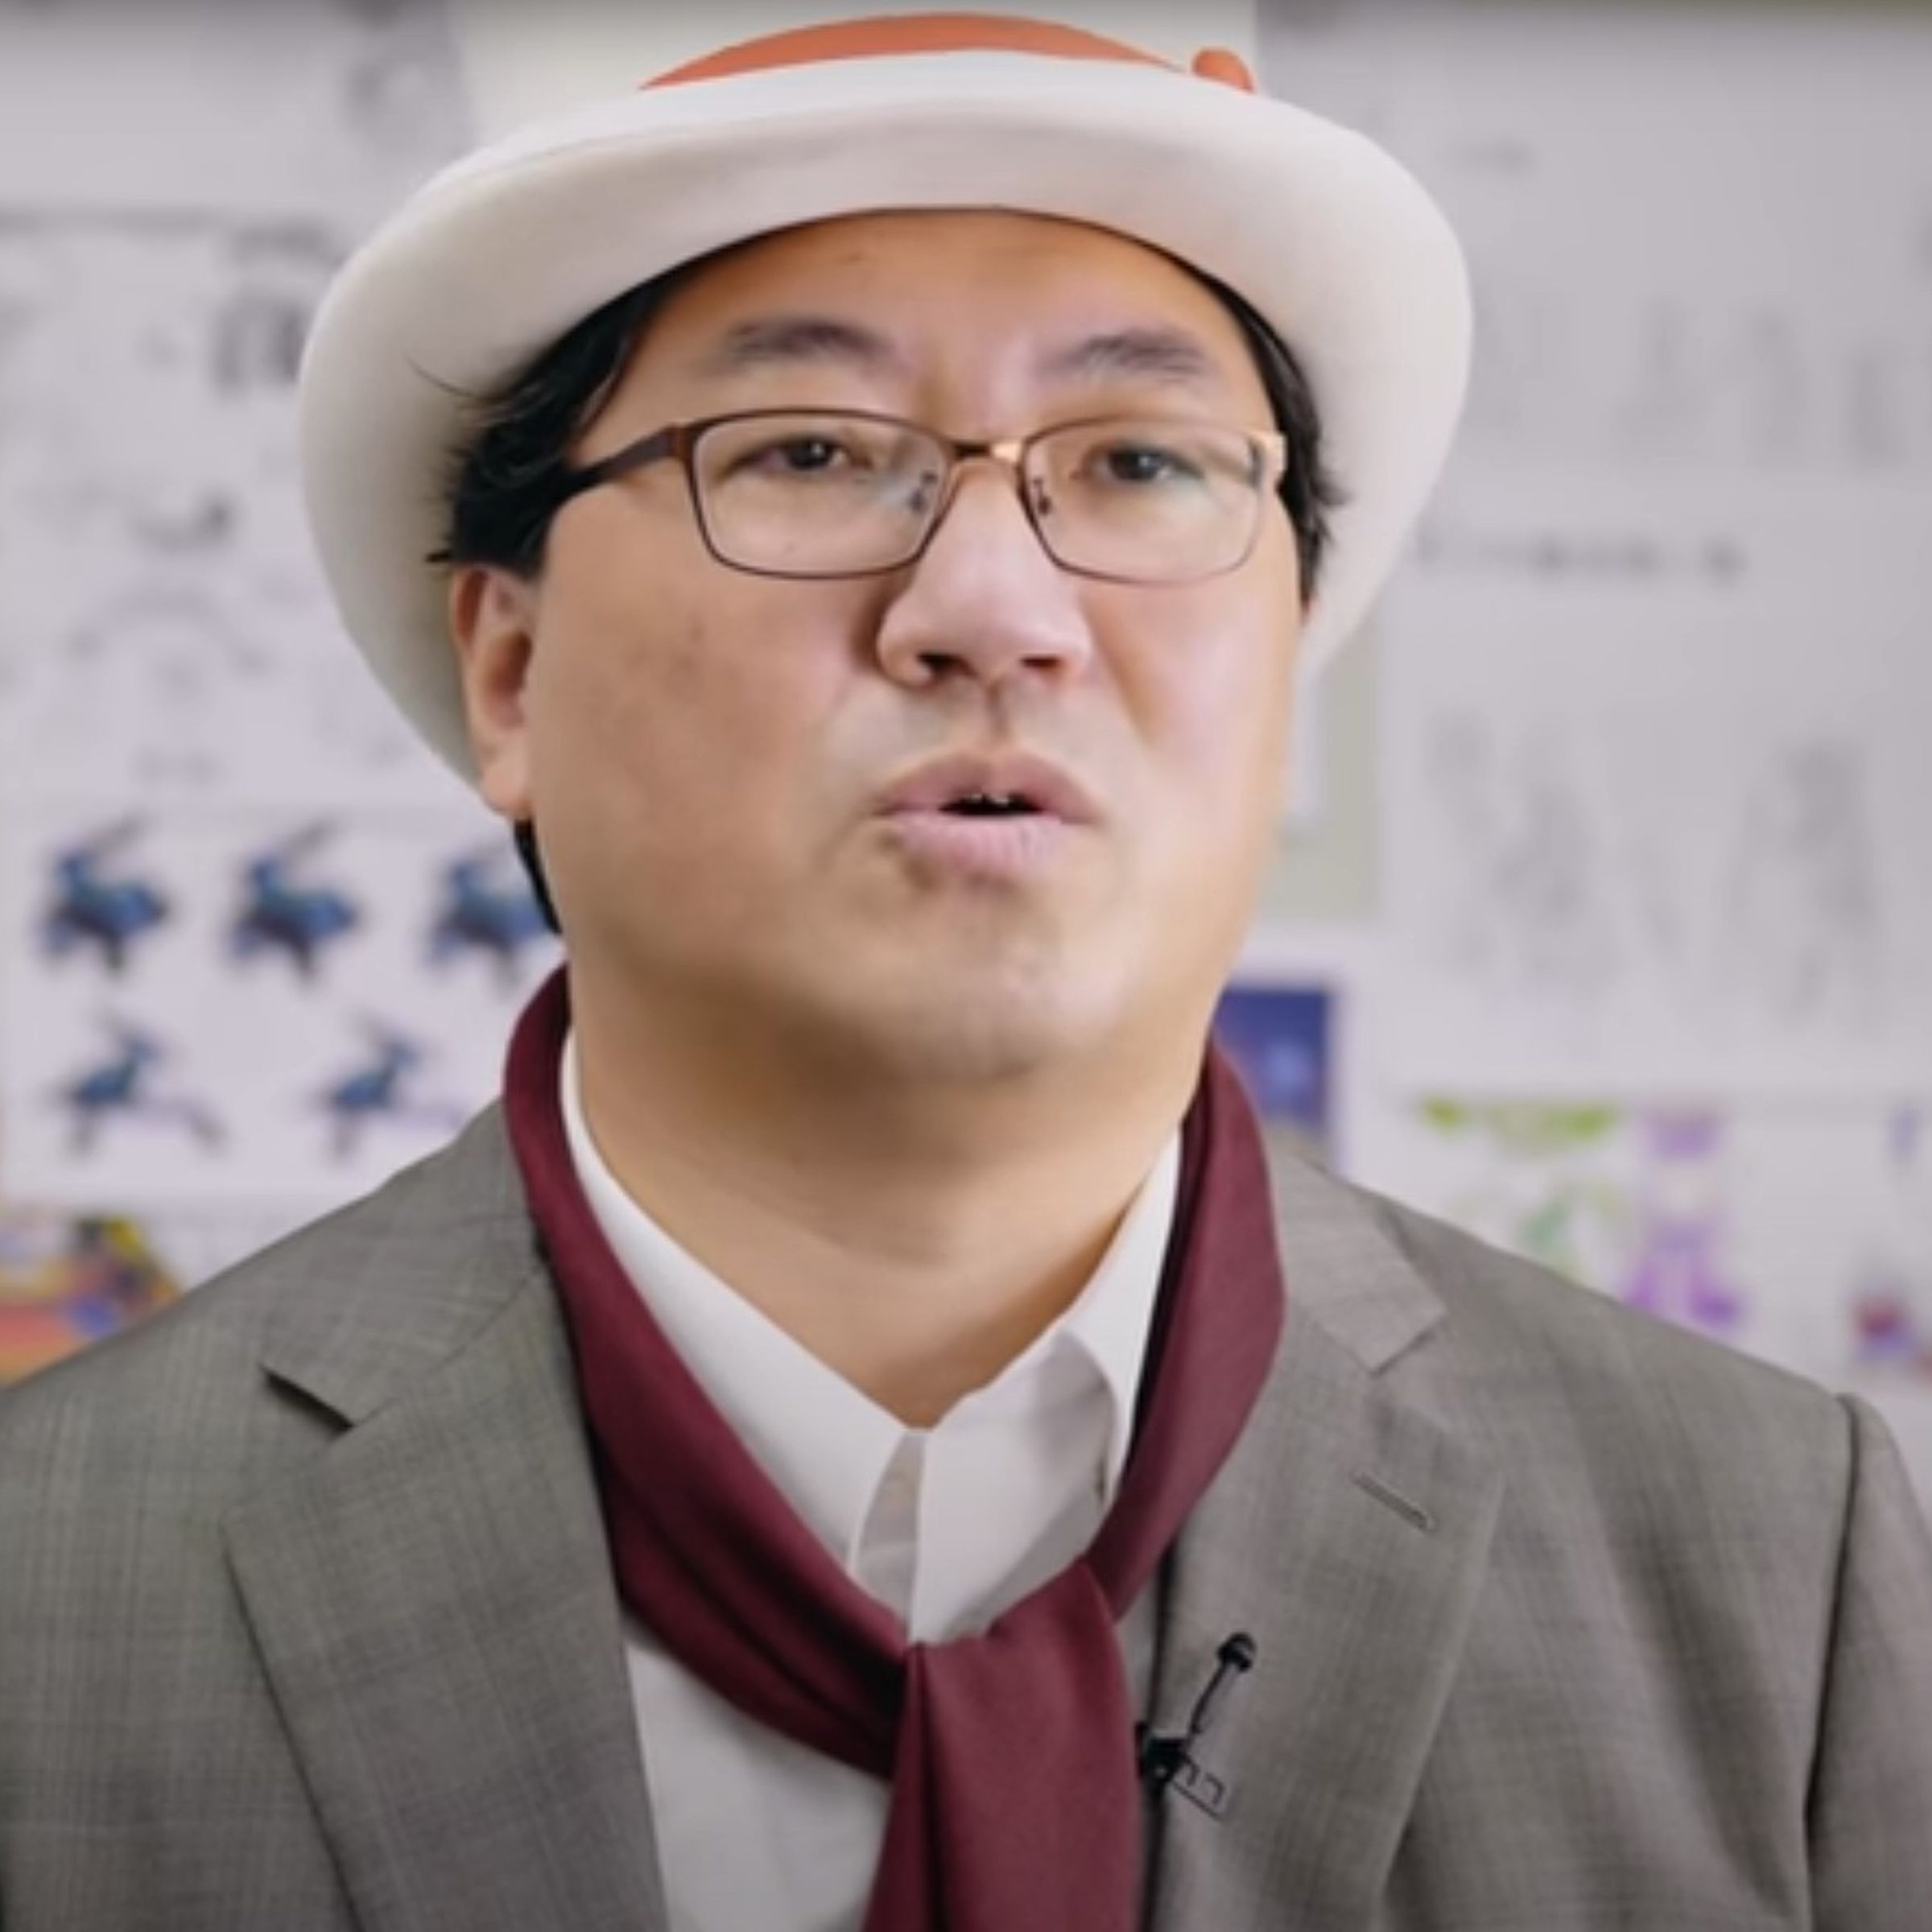 Yuji Naka in a white tophat and grey suit